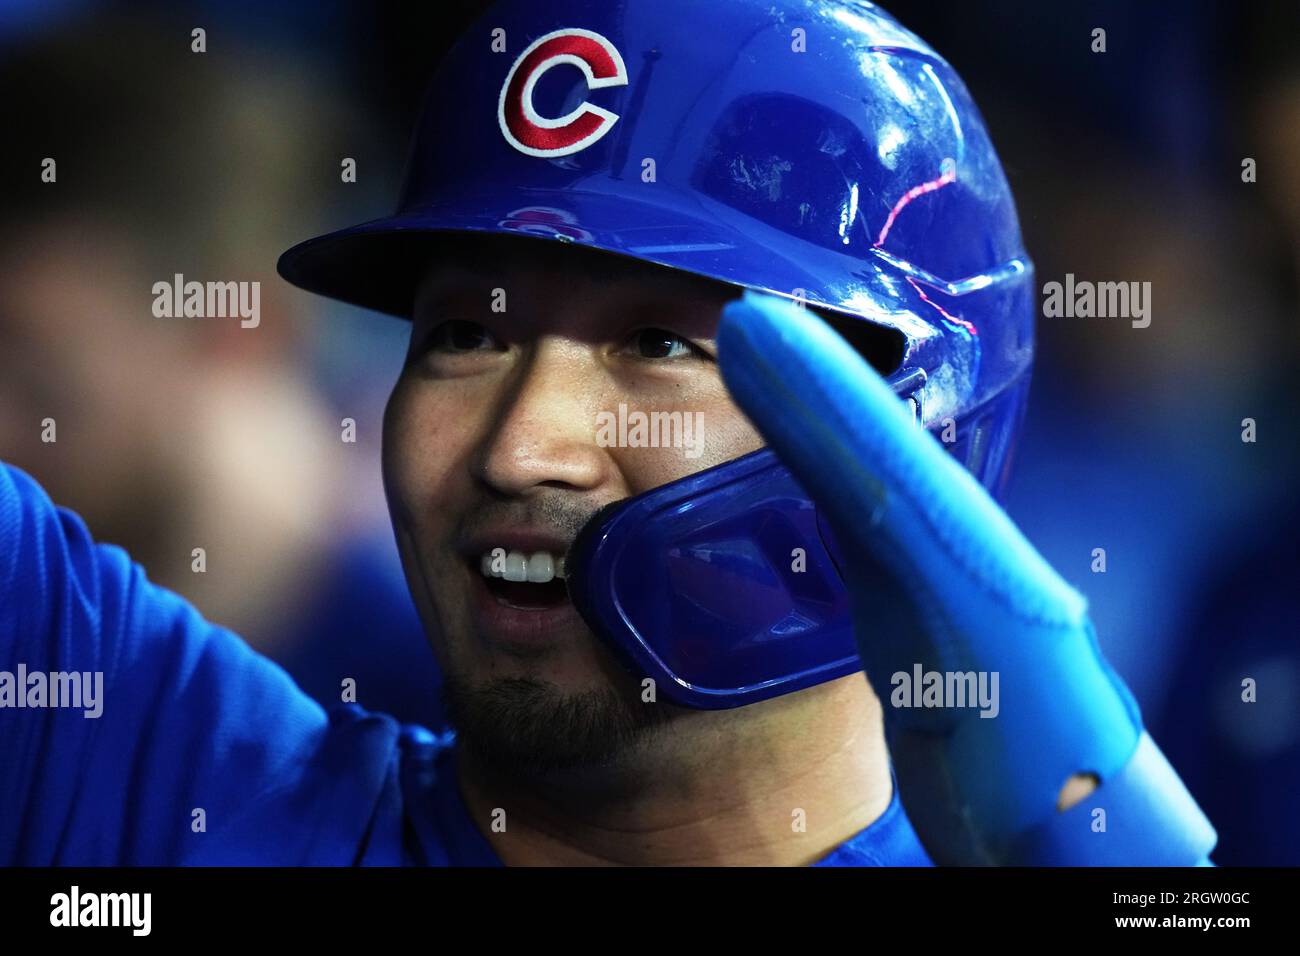 Chicago Cubs Seiya Suzuki celebrates after scoring against the Toronto Blue Jays during the fourth inning of a baseball game Friday, Aug